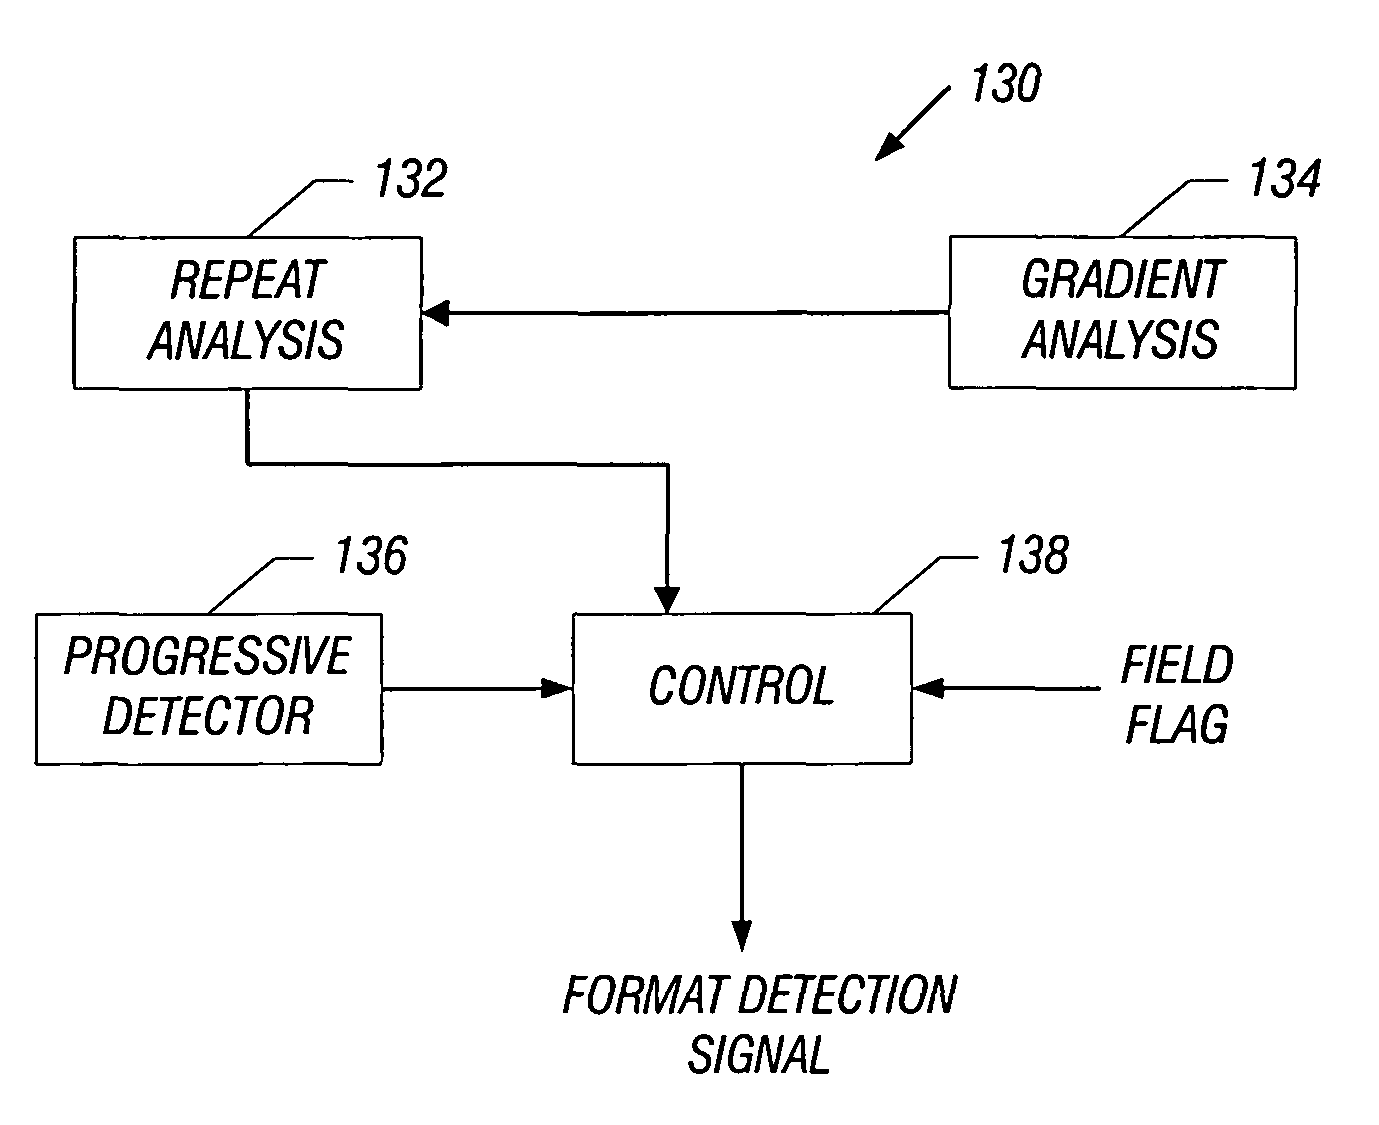 Detecting video format information in a sequence of video pictures